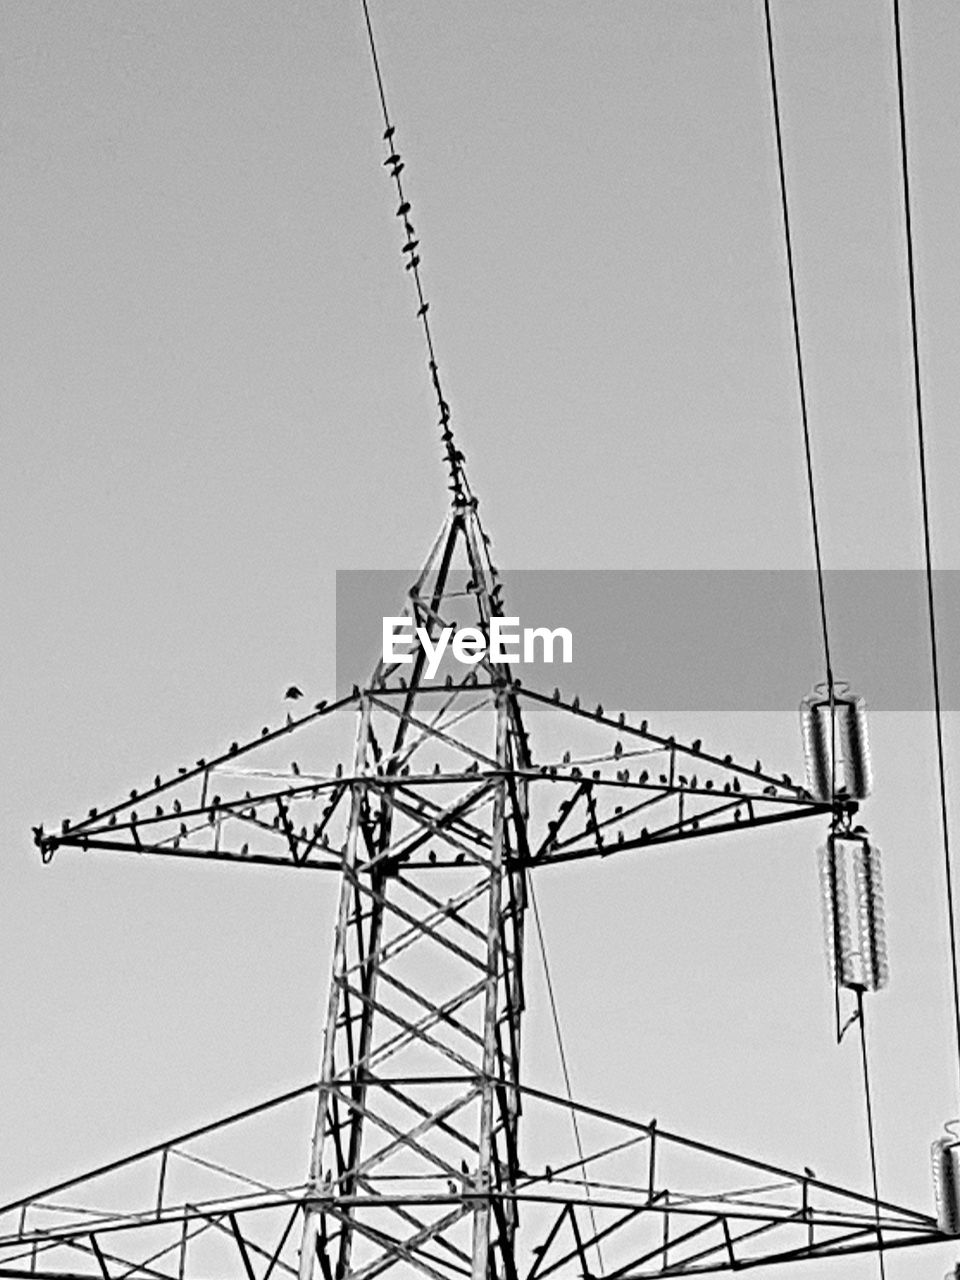 DIRECTLY BELOW SHOT OF ELECTRICITY PYLON AGAINST SKY